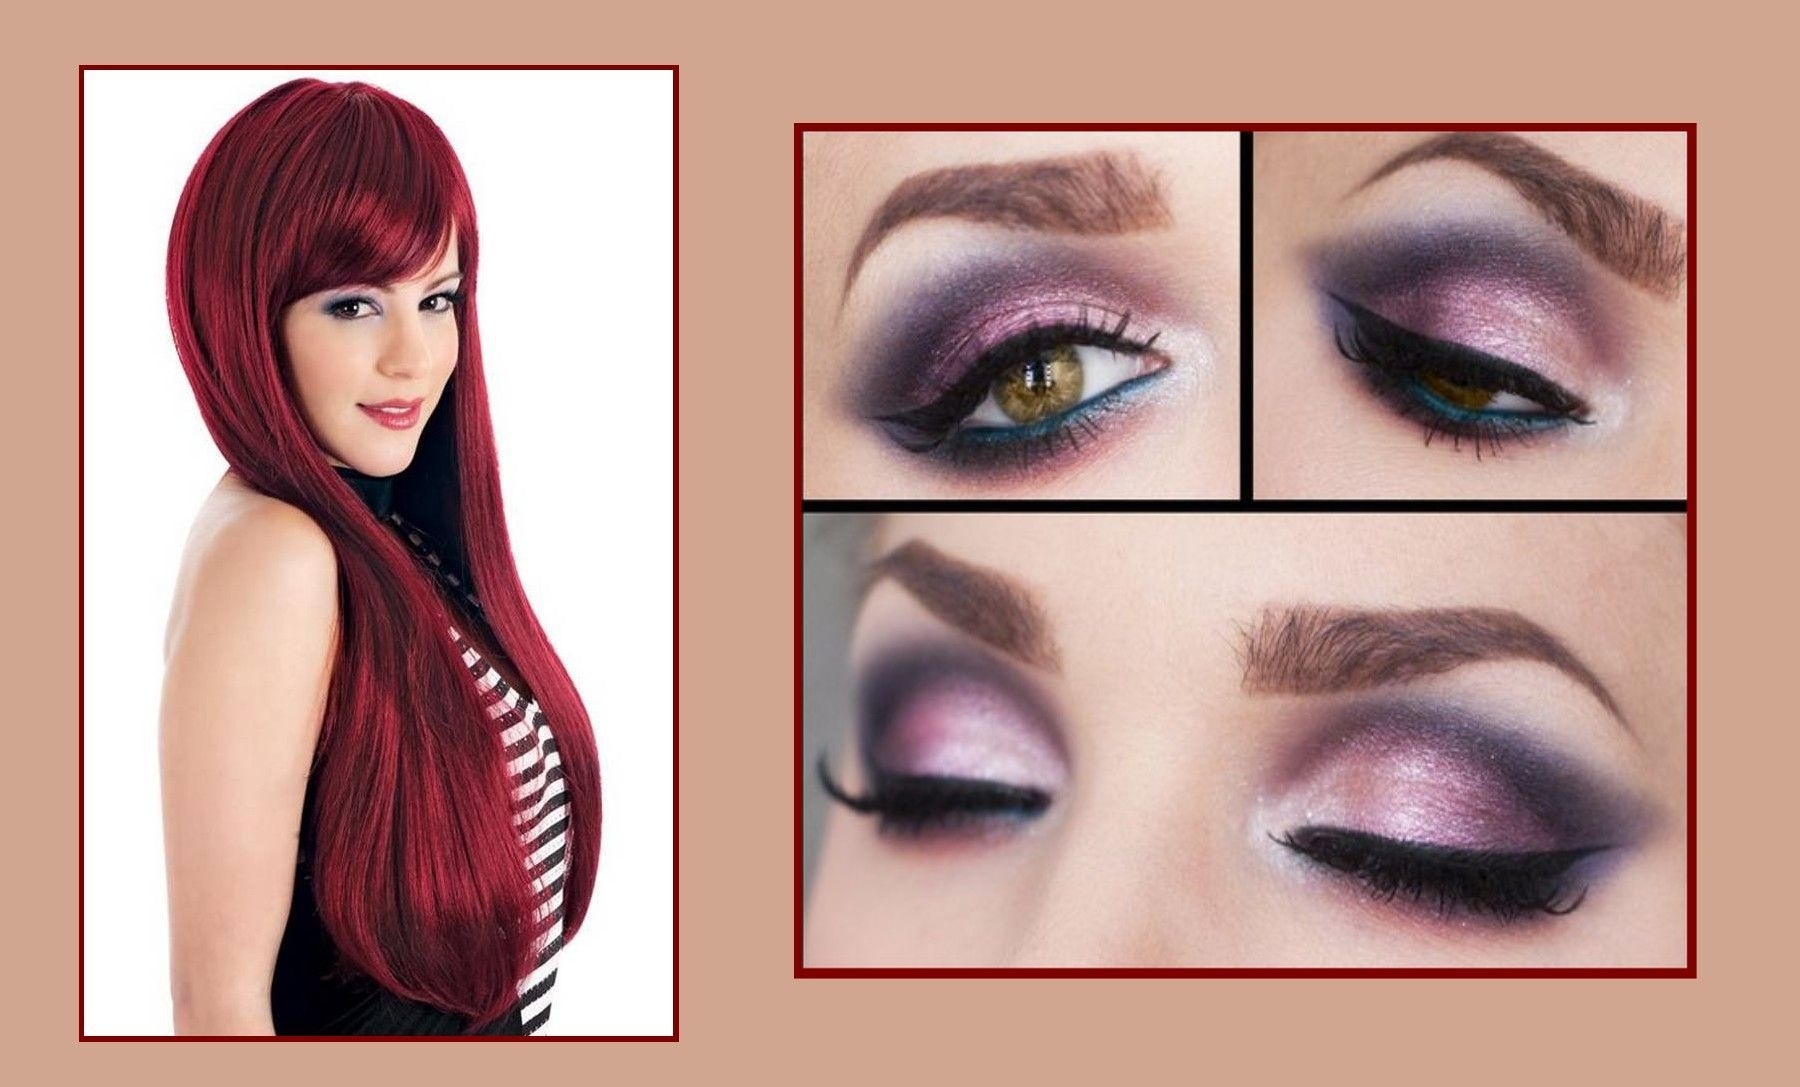 Eye Makeup For Hazel Eyes And Red Hair | Eye Makeup, Makeup with regard to Makeup Tips For Hazel Eyes And Red Hair